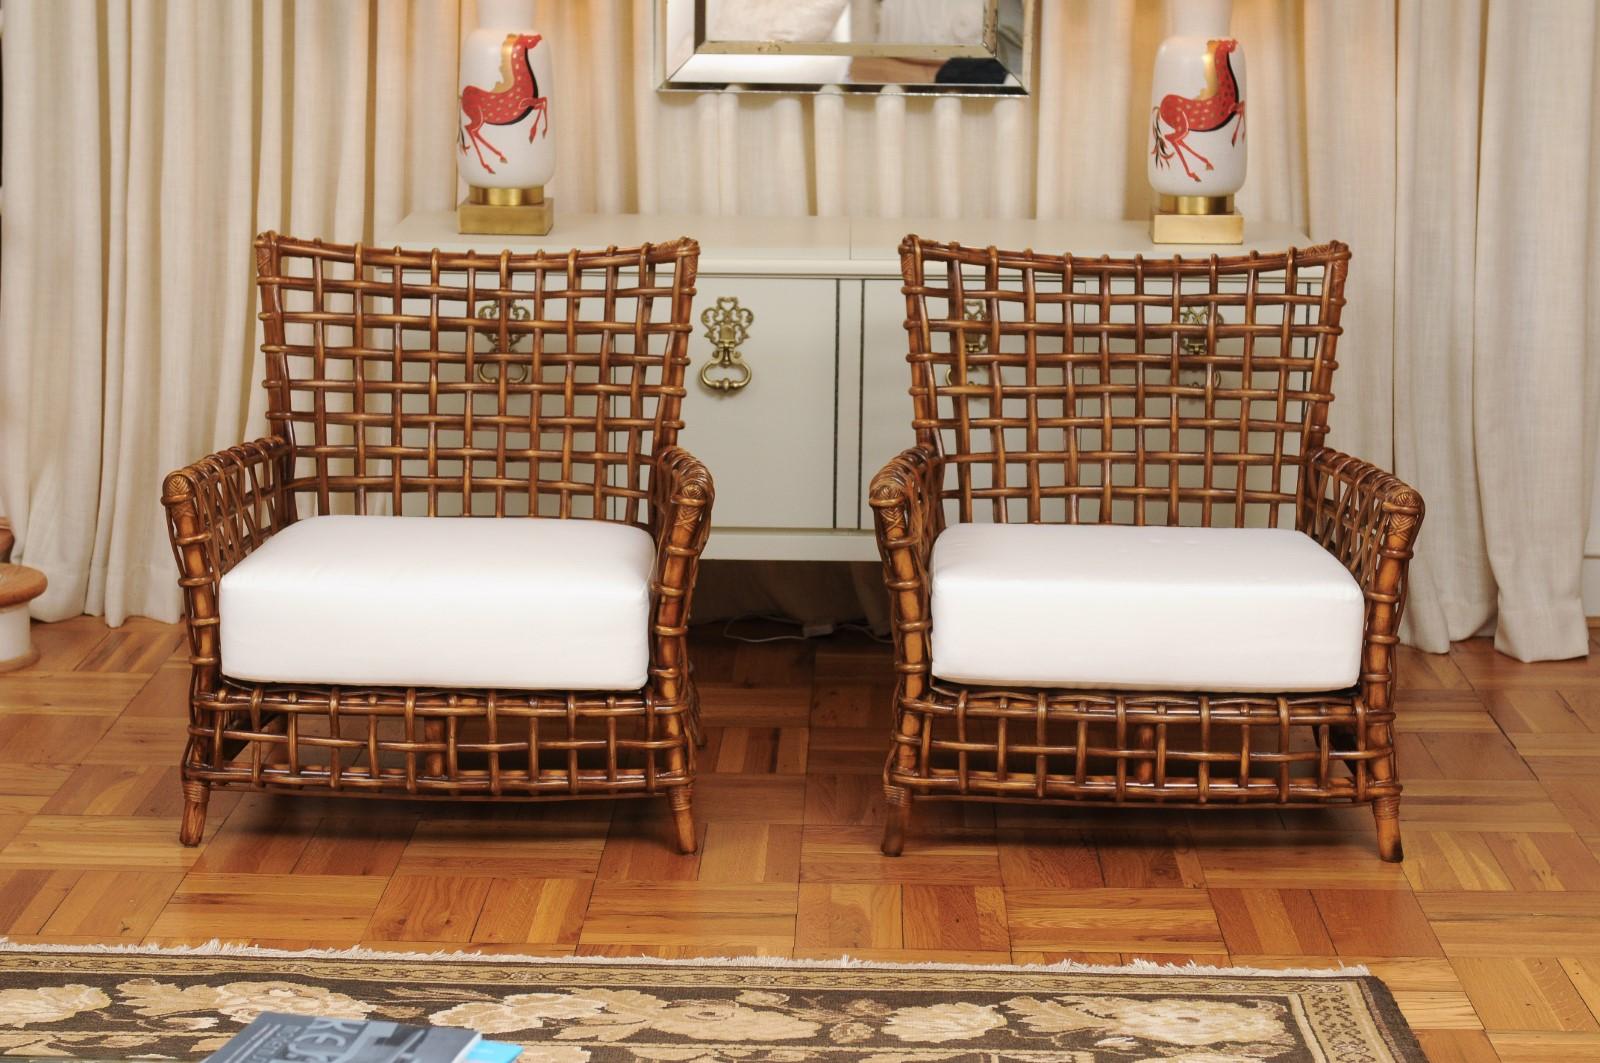 American Fabulous Pair of Caramel Rattan and Cane Club Chairs - 2 Pair Available For Sale